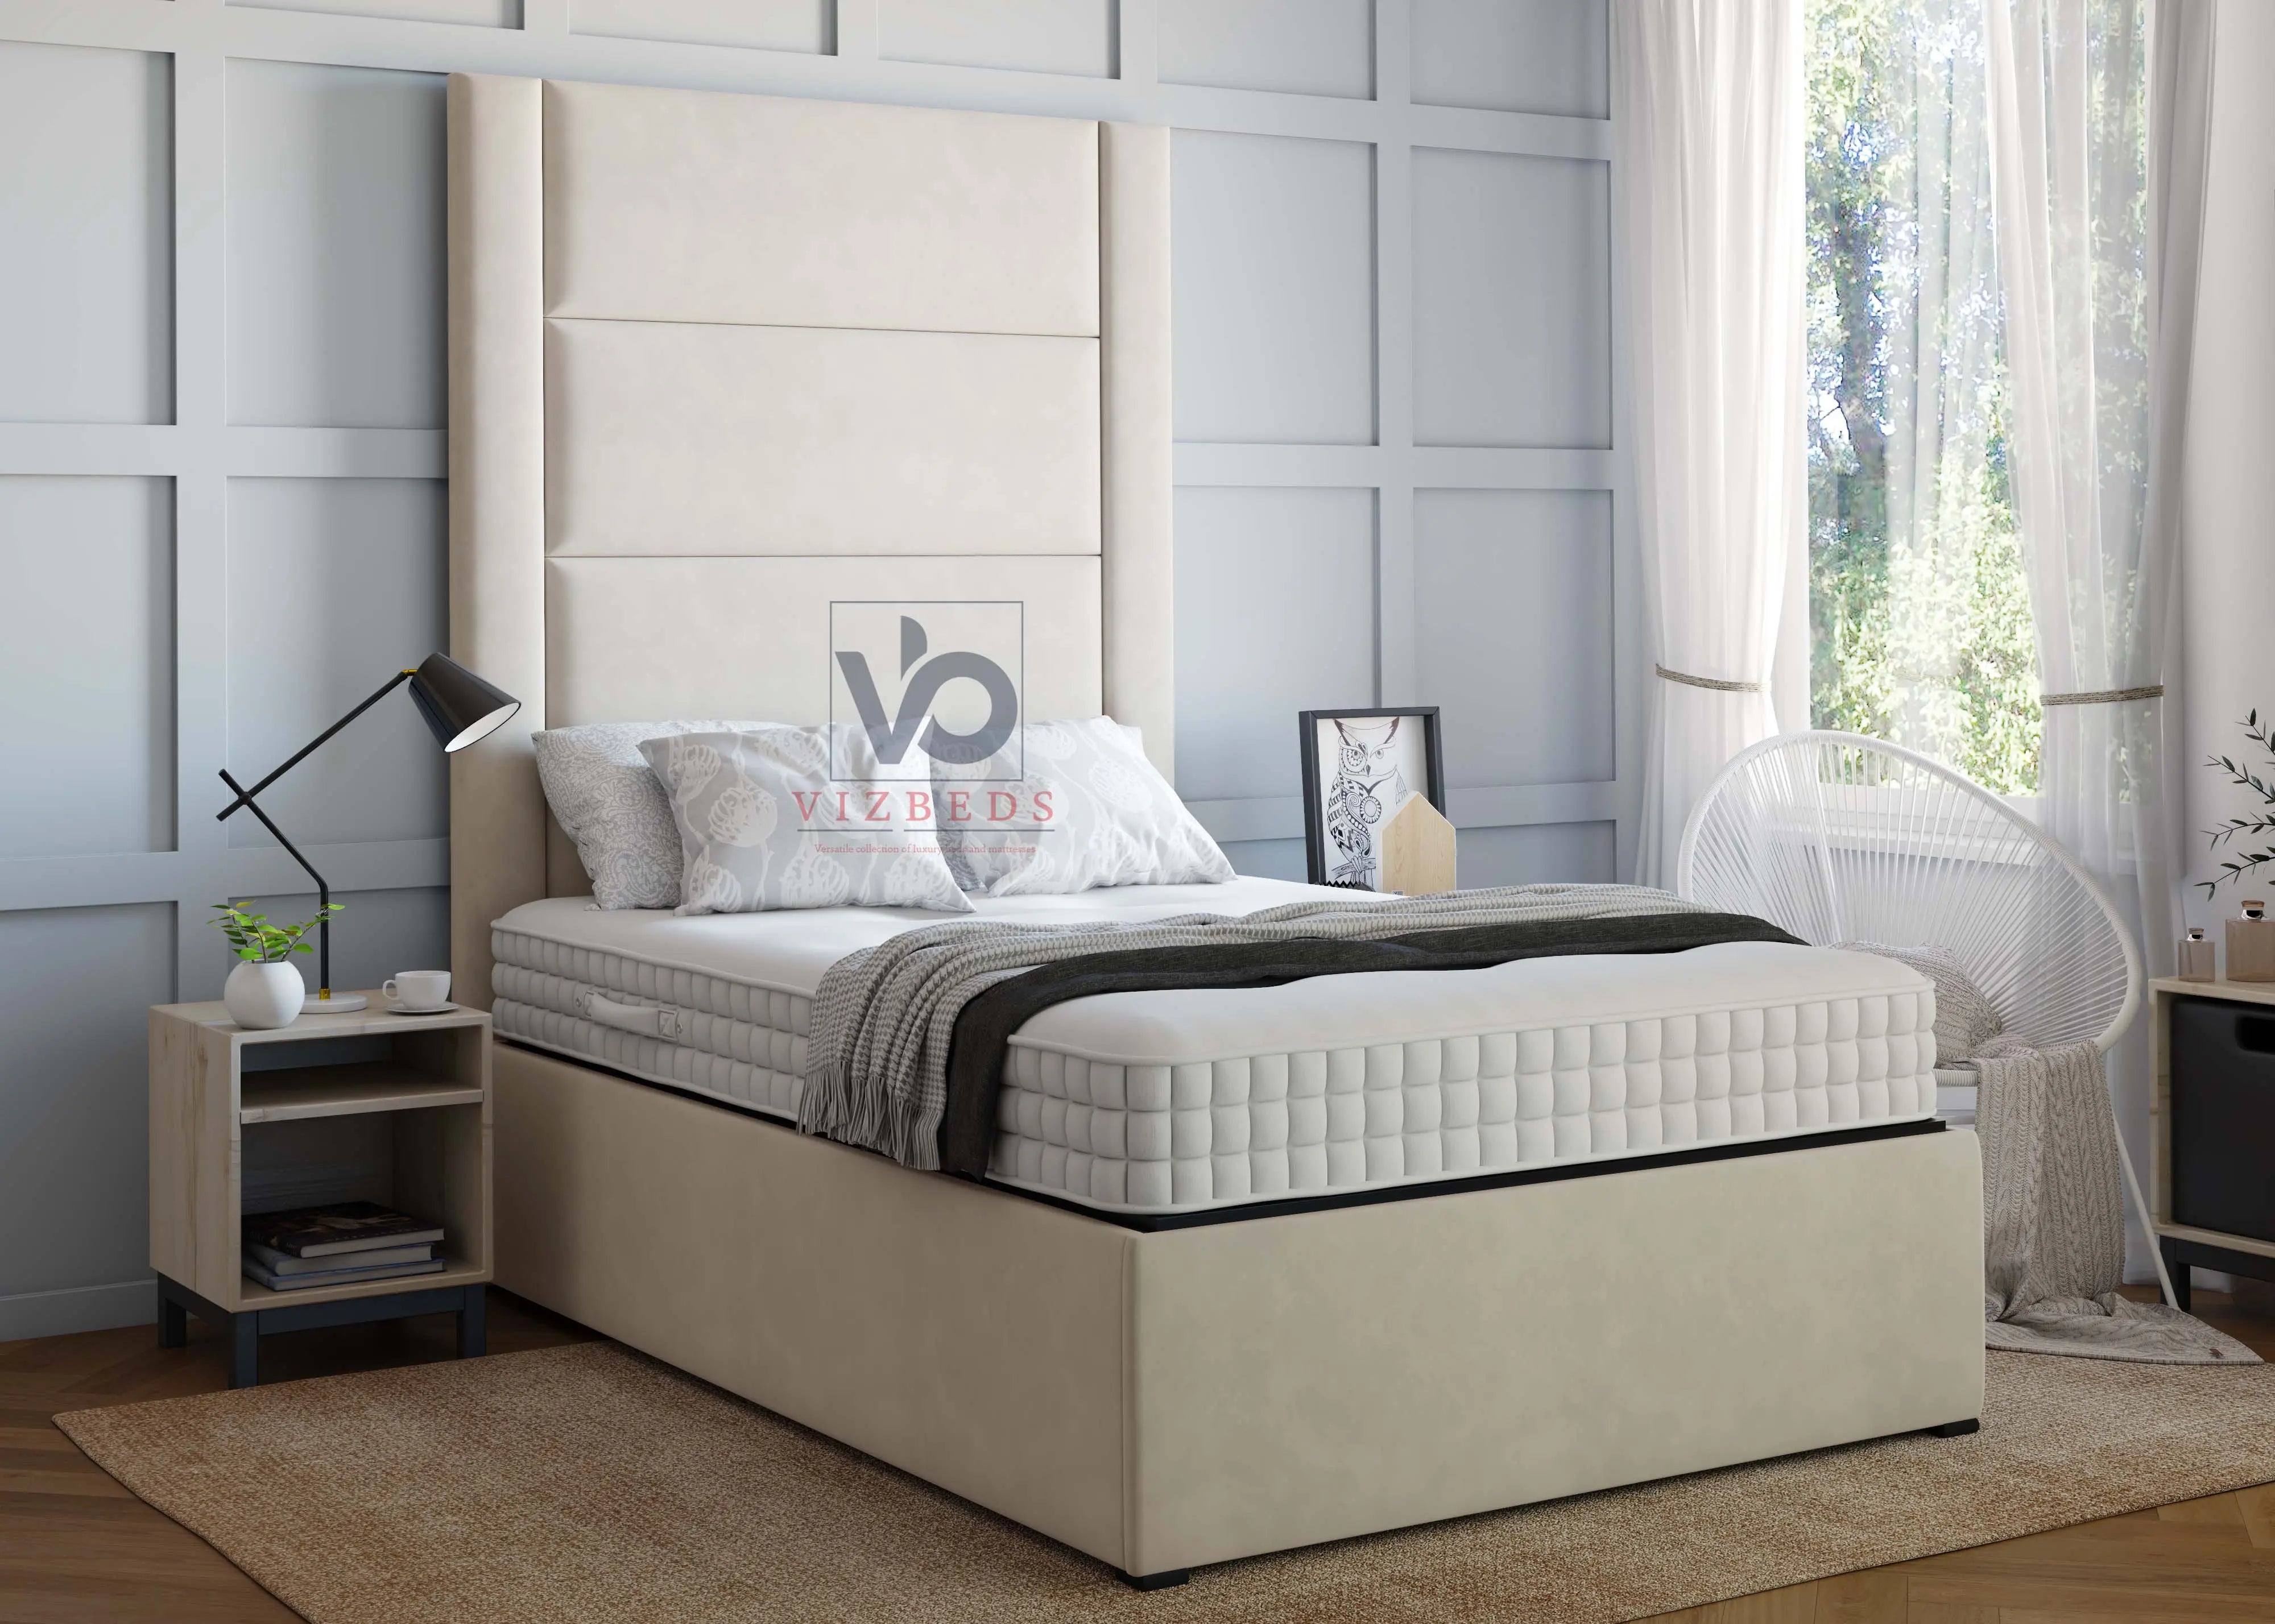 Simple Luxury Vizbeds Luxury Bed With Extended Headboard